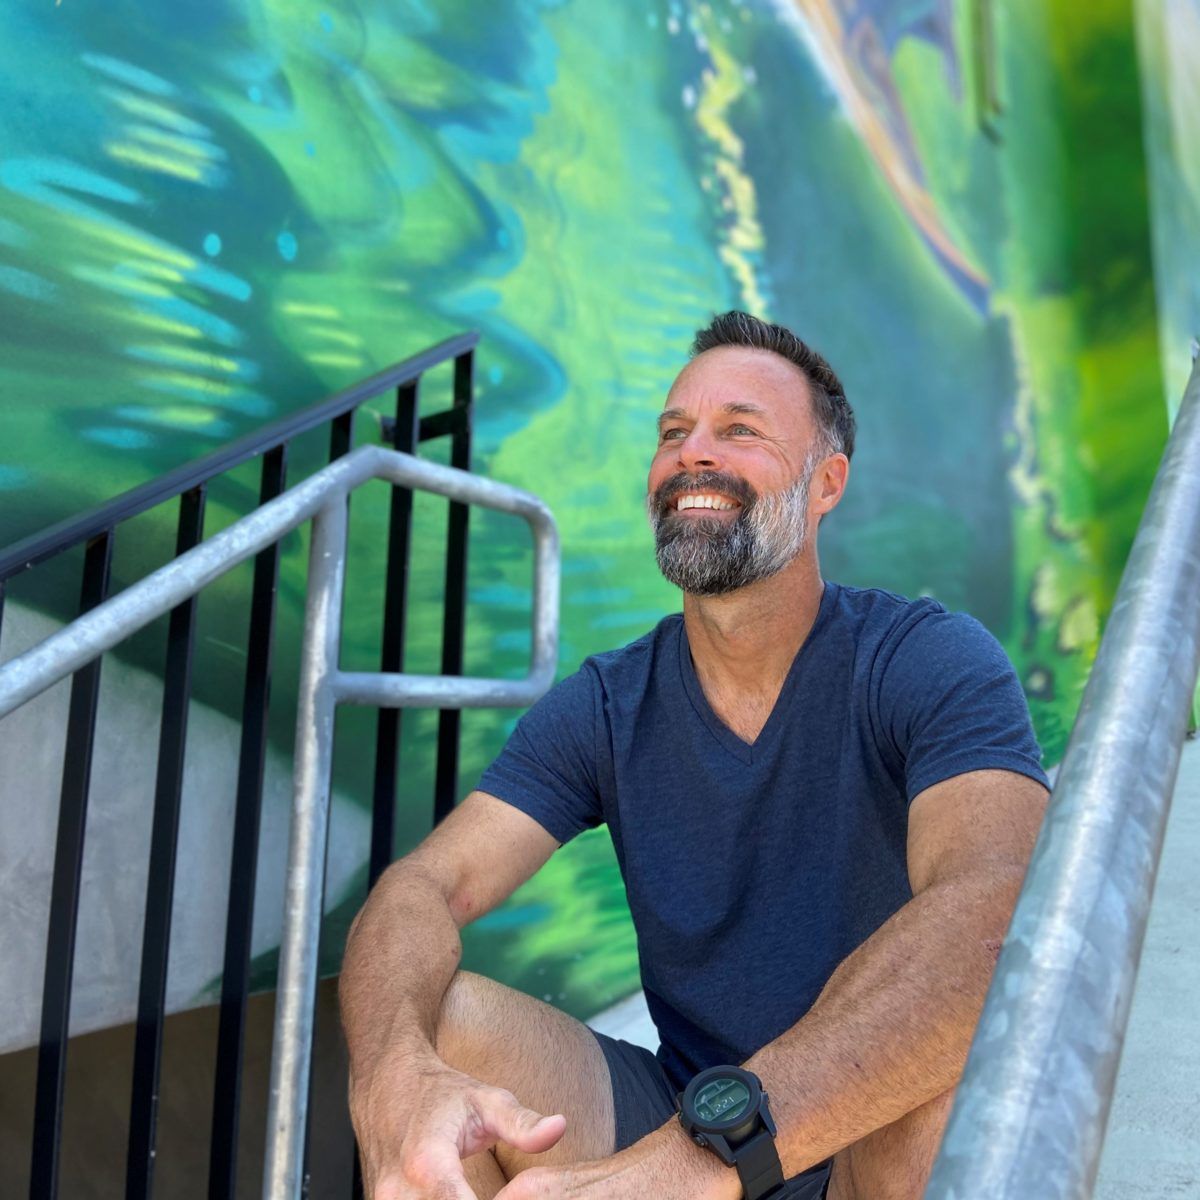 Greg Lenac sits on a stairway next to a blue and green mural